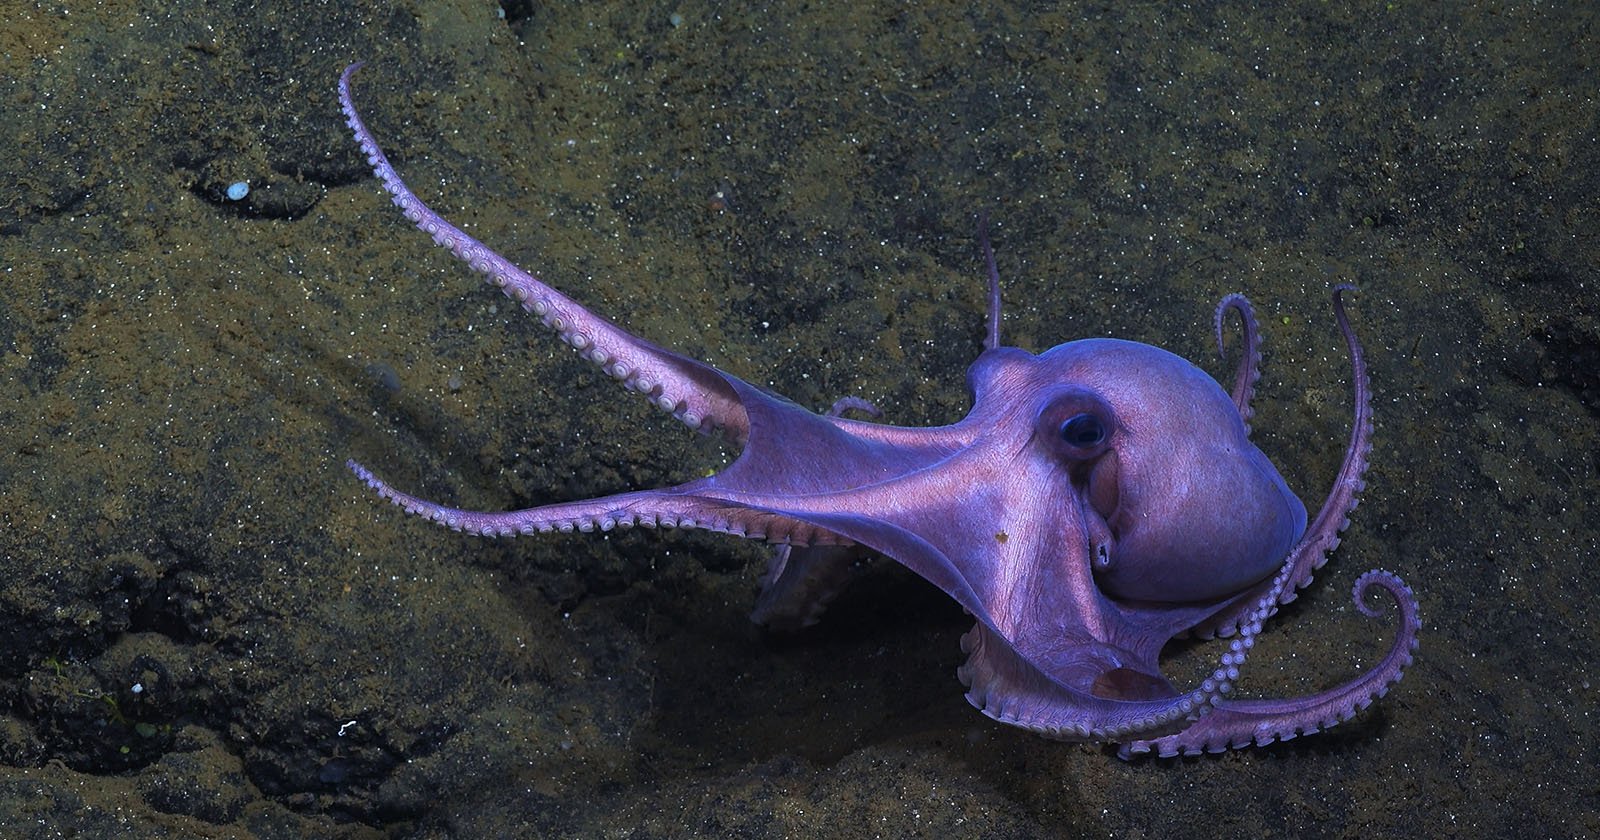 How ‘Secrets of the Octopus’ Shows the Beauty, Intelligence, and Alien Charm of Octopuses